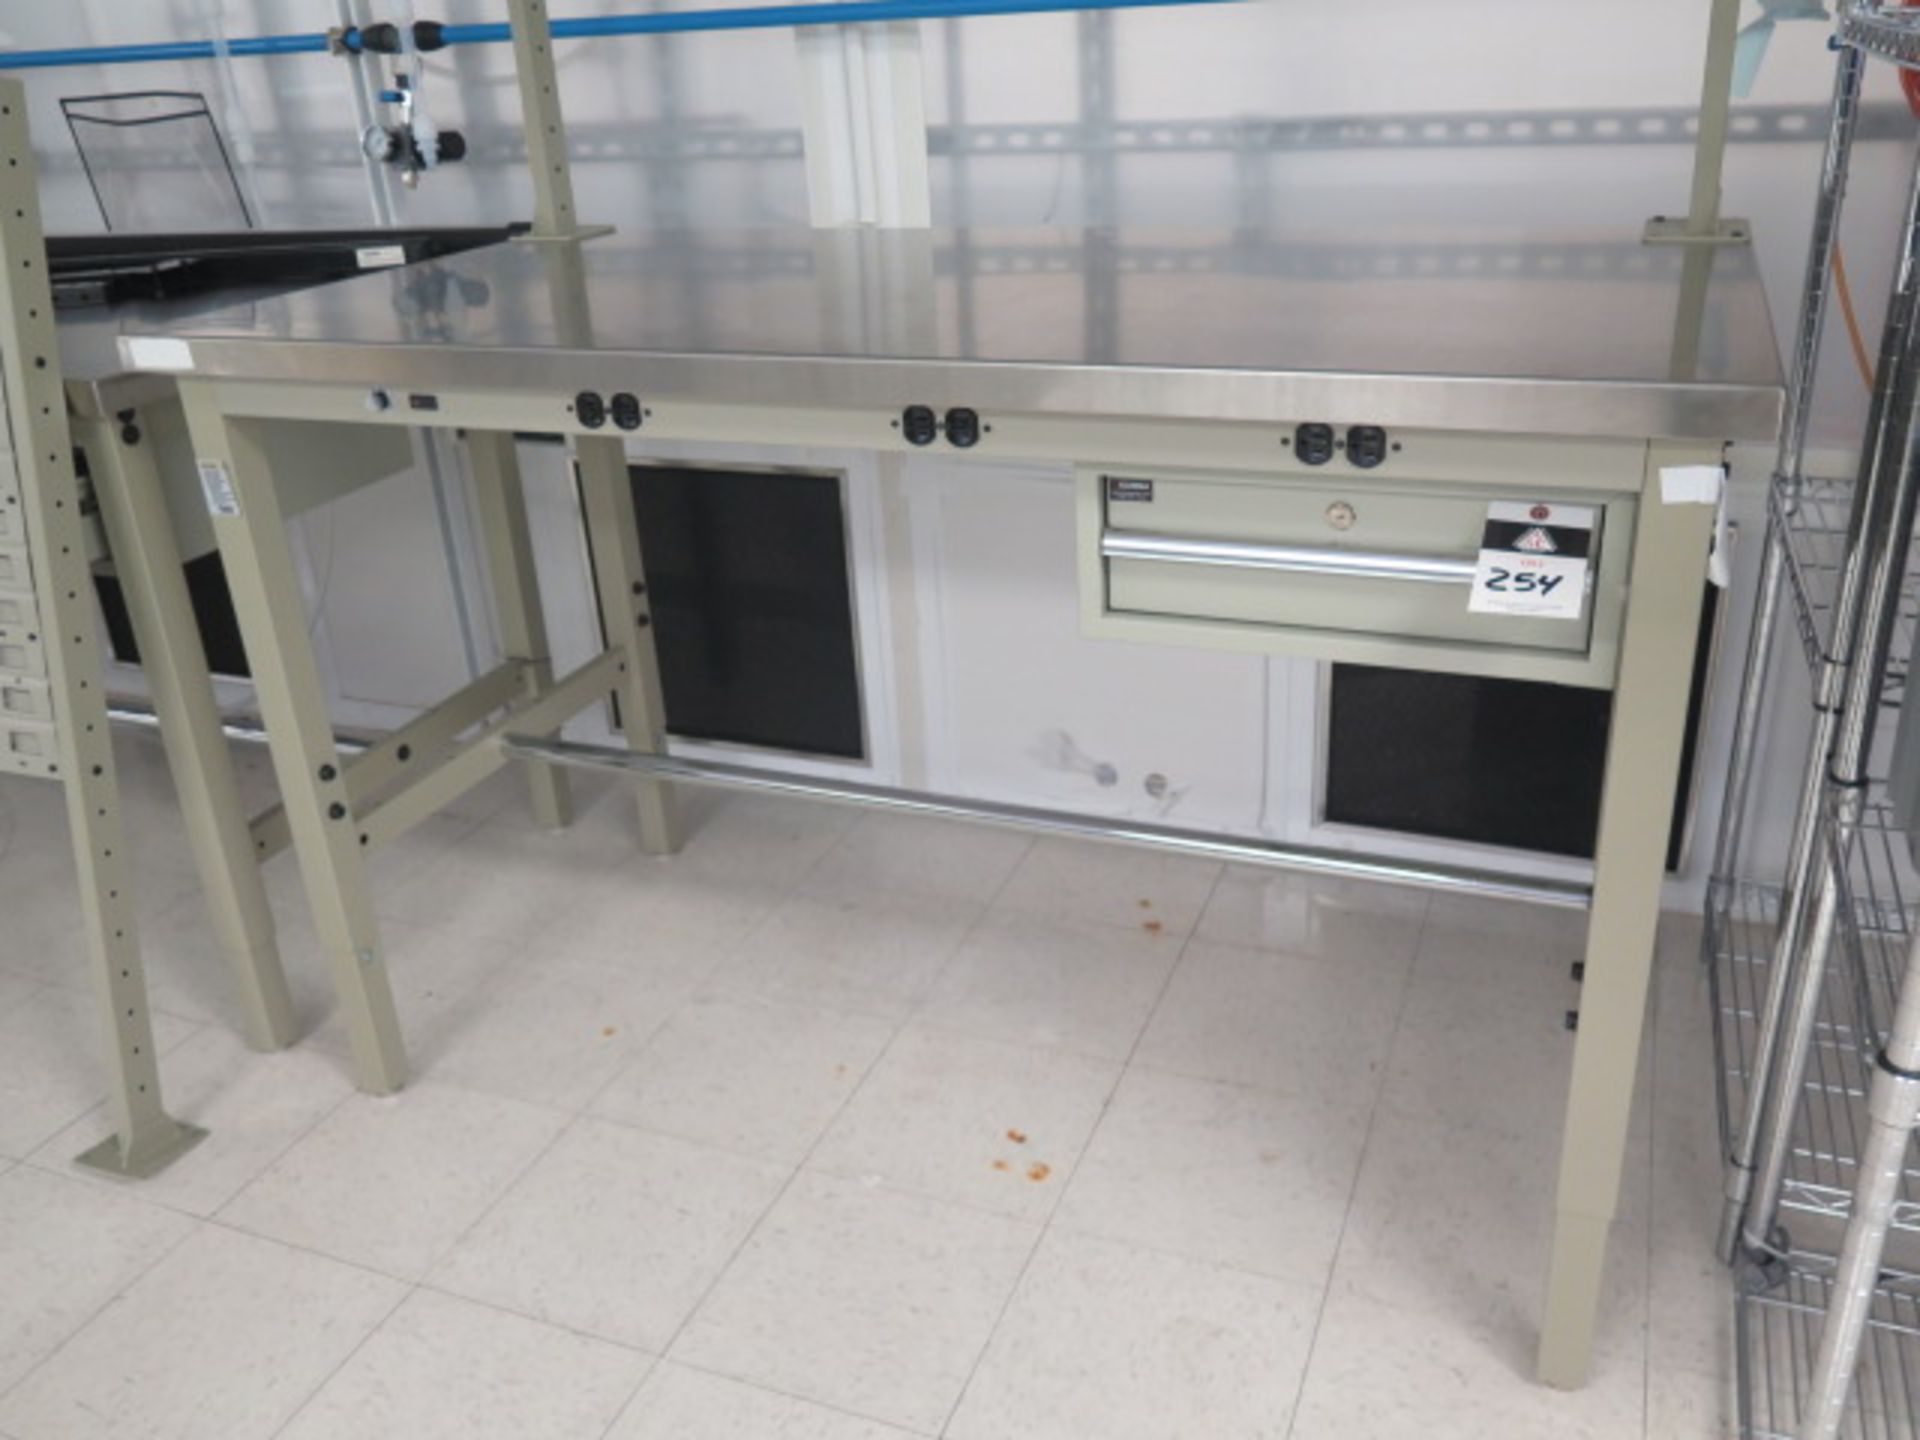 Global 30" x 60" Stainless Top Lab Benches (2) w/ Back-Boards and Lights (SOLD AS-IS - NO WARRANTY) - Image 5 of 11